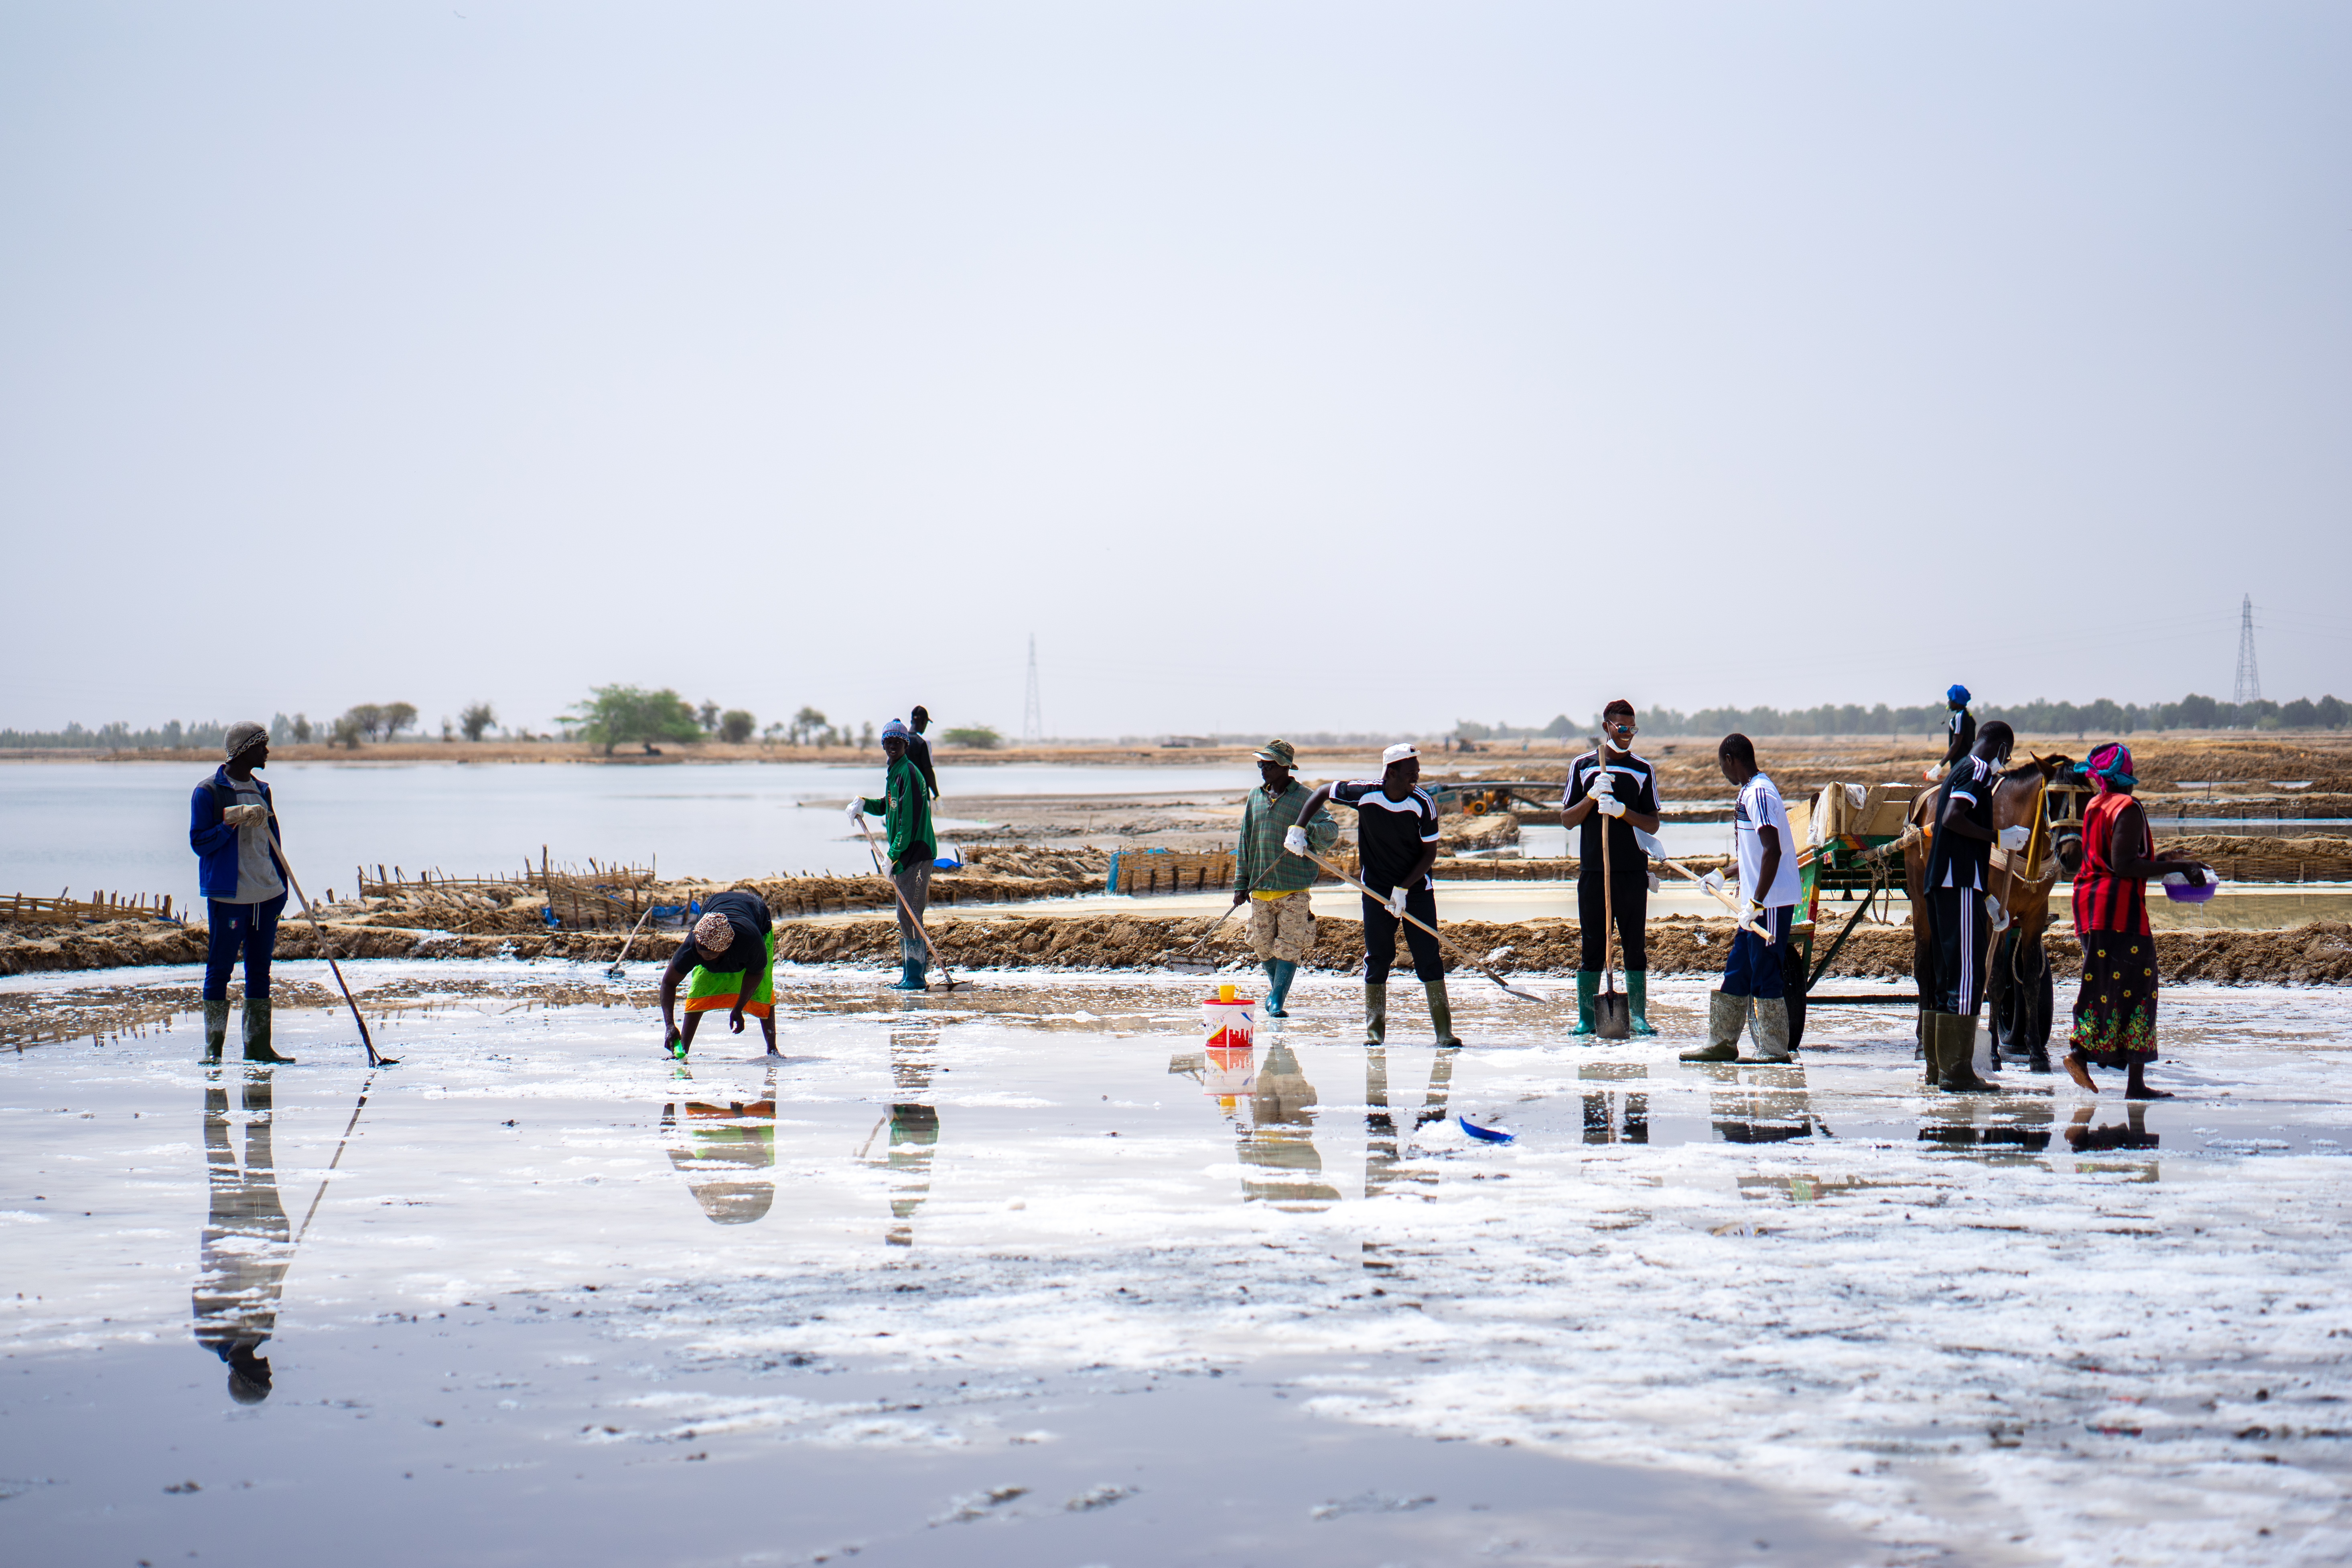 A group do poeple are standing in a salt field.